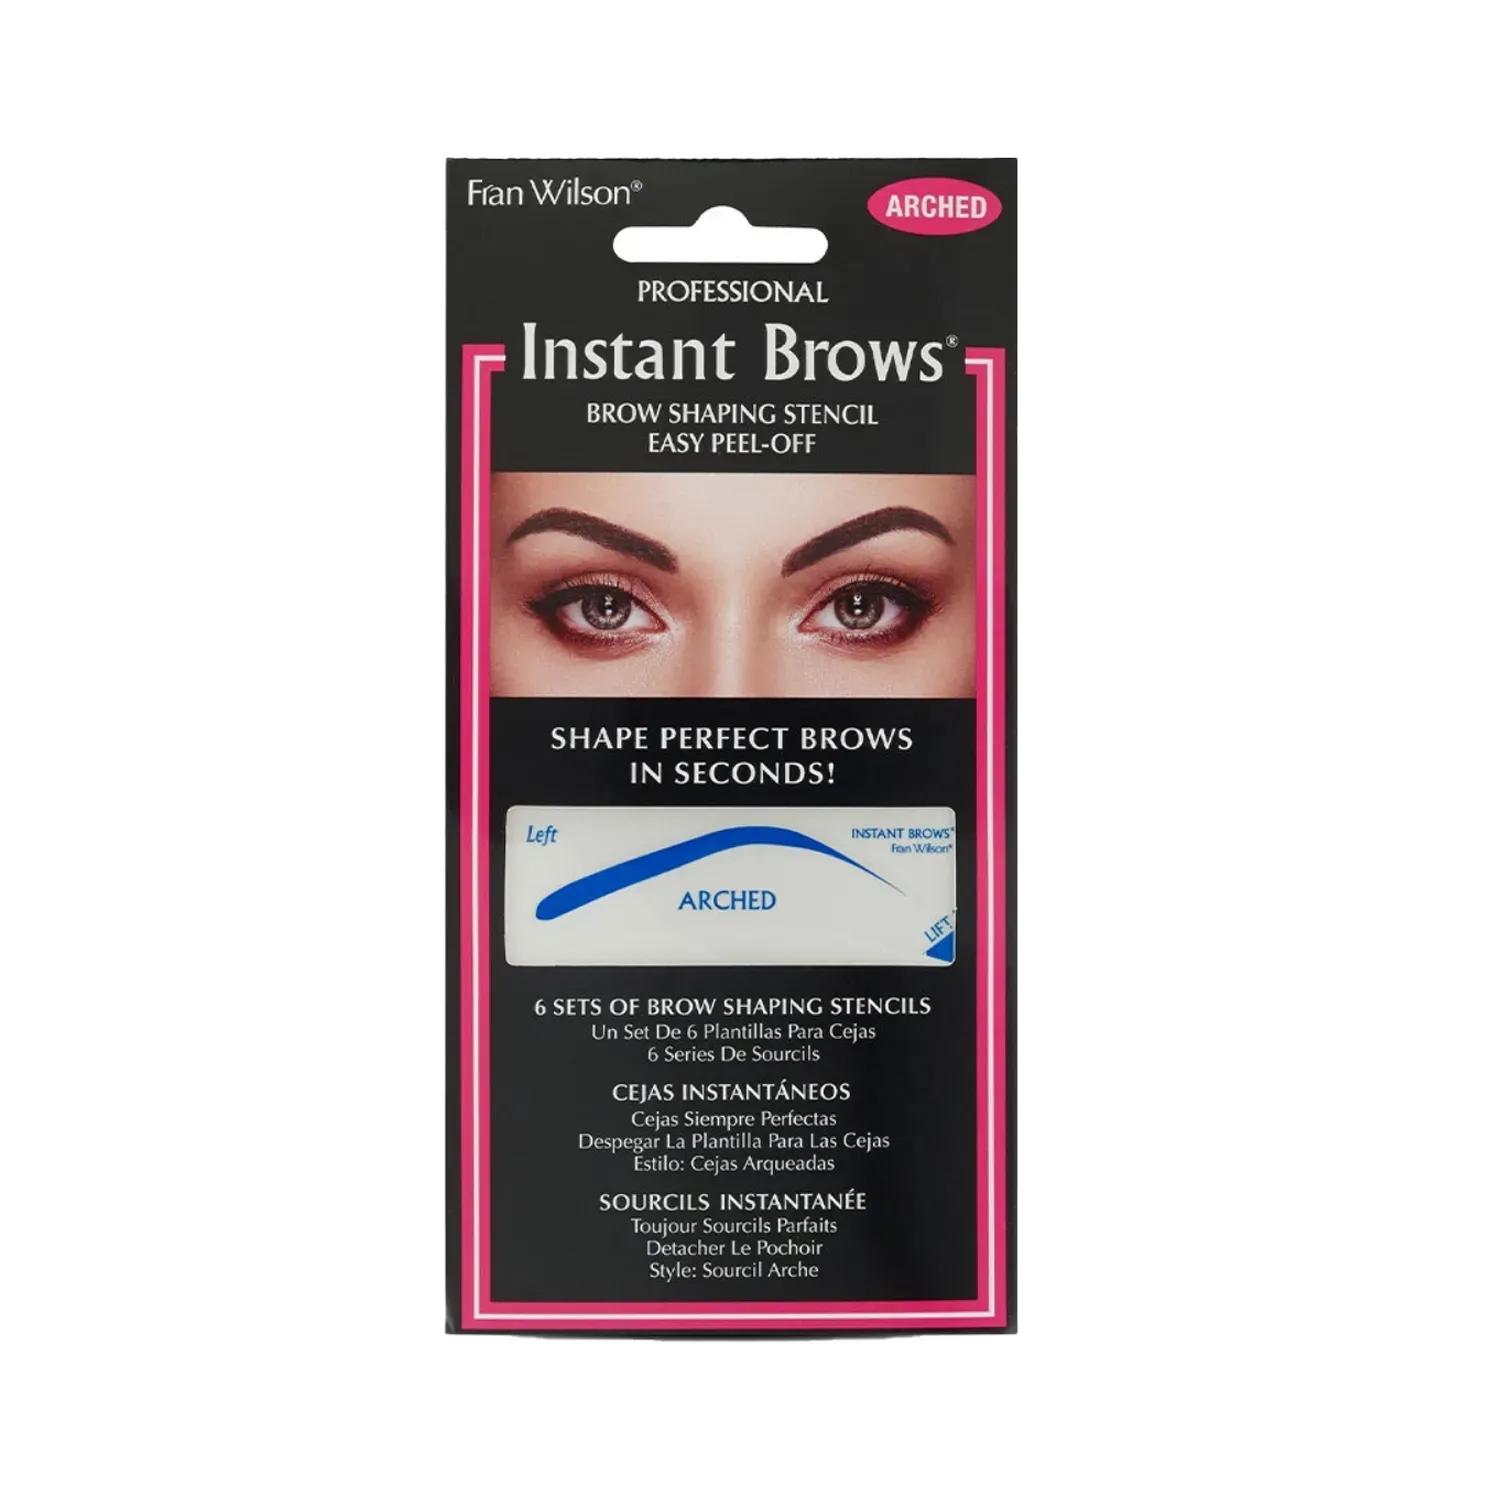 fran-wilson-moodmatcher-instant-brows-shaping-stencil---arched-(set-of-6)